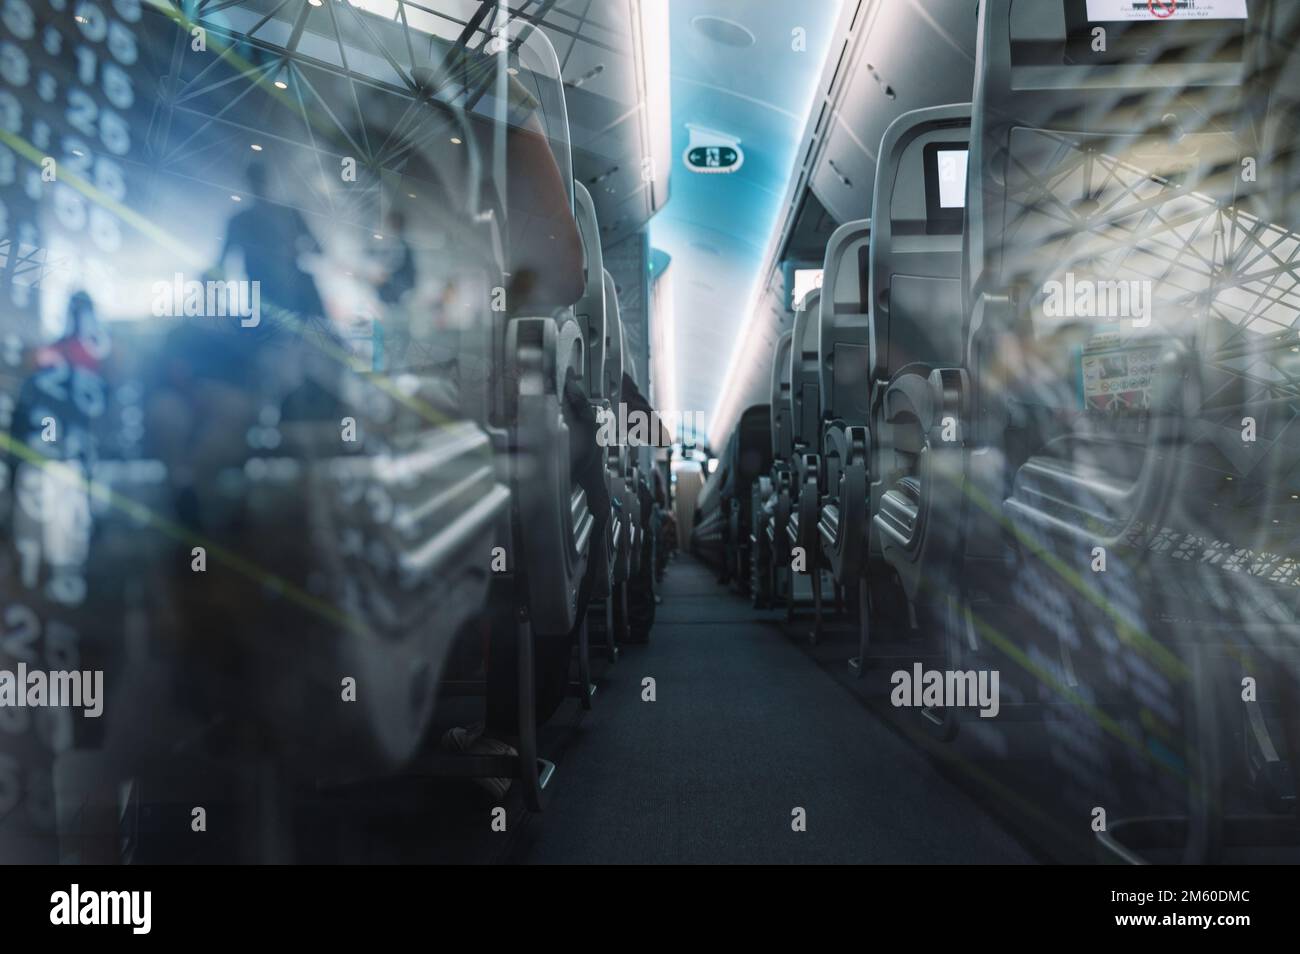 Aircraft interior with aisle and airplane seats Stock Photo